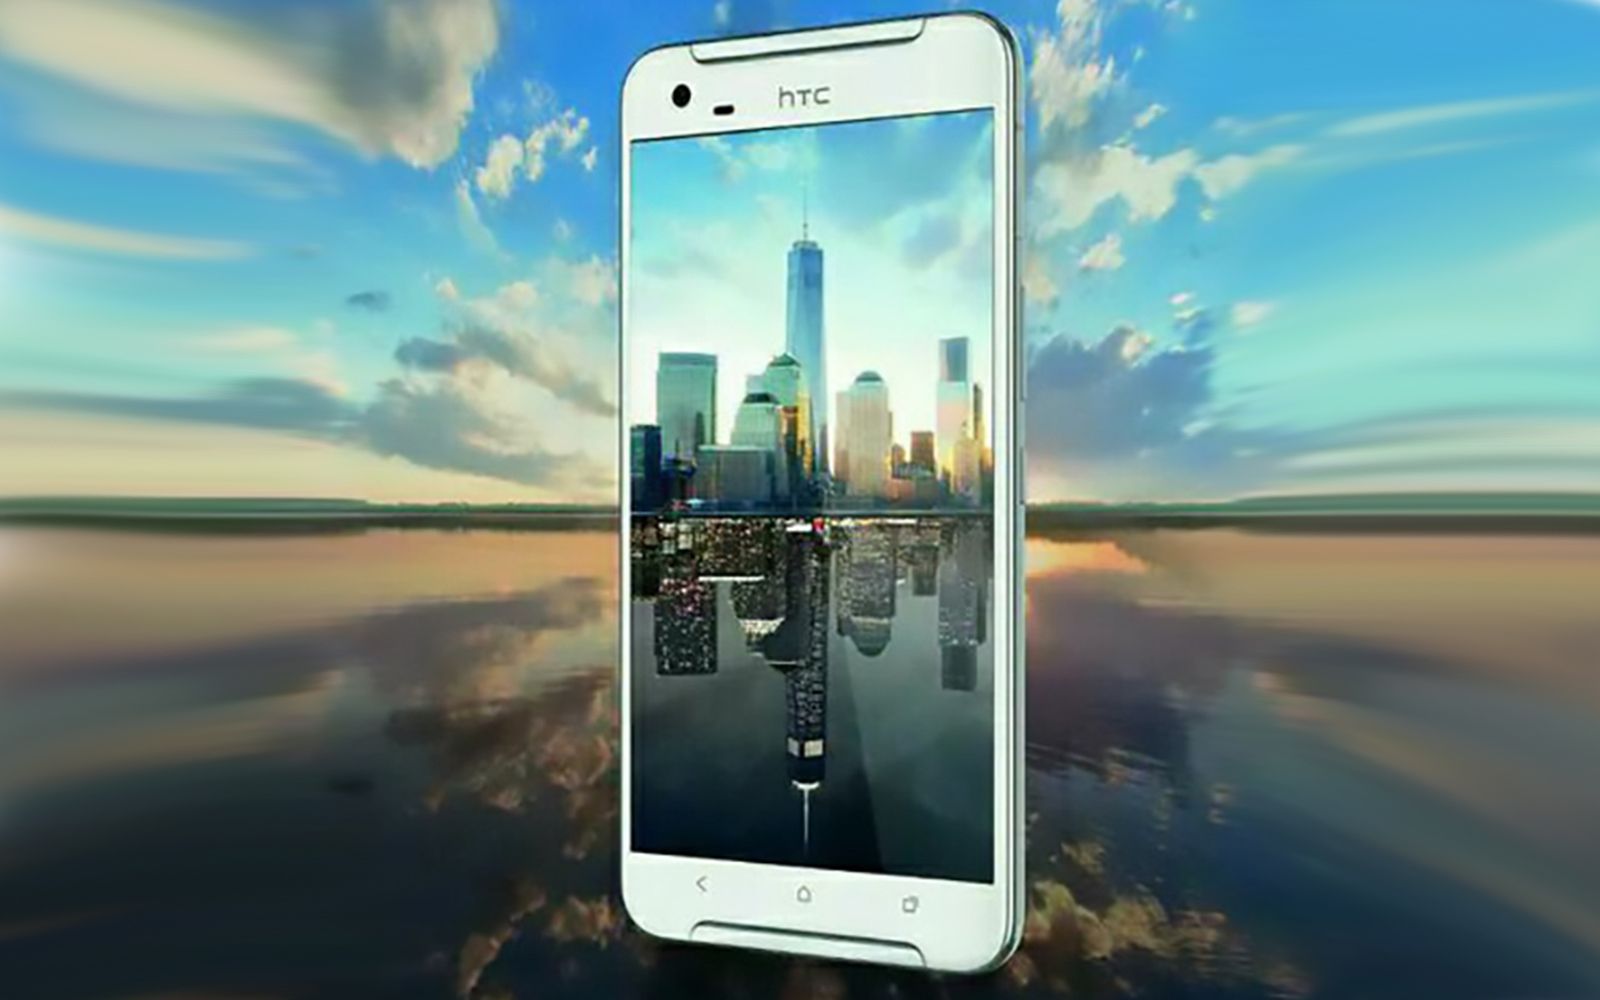 htc one x9 official affordable high end specs image 1